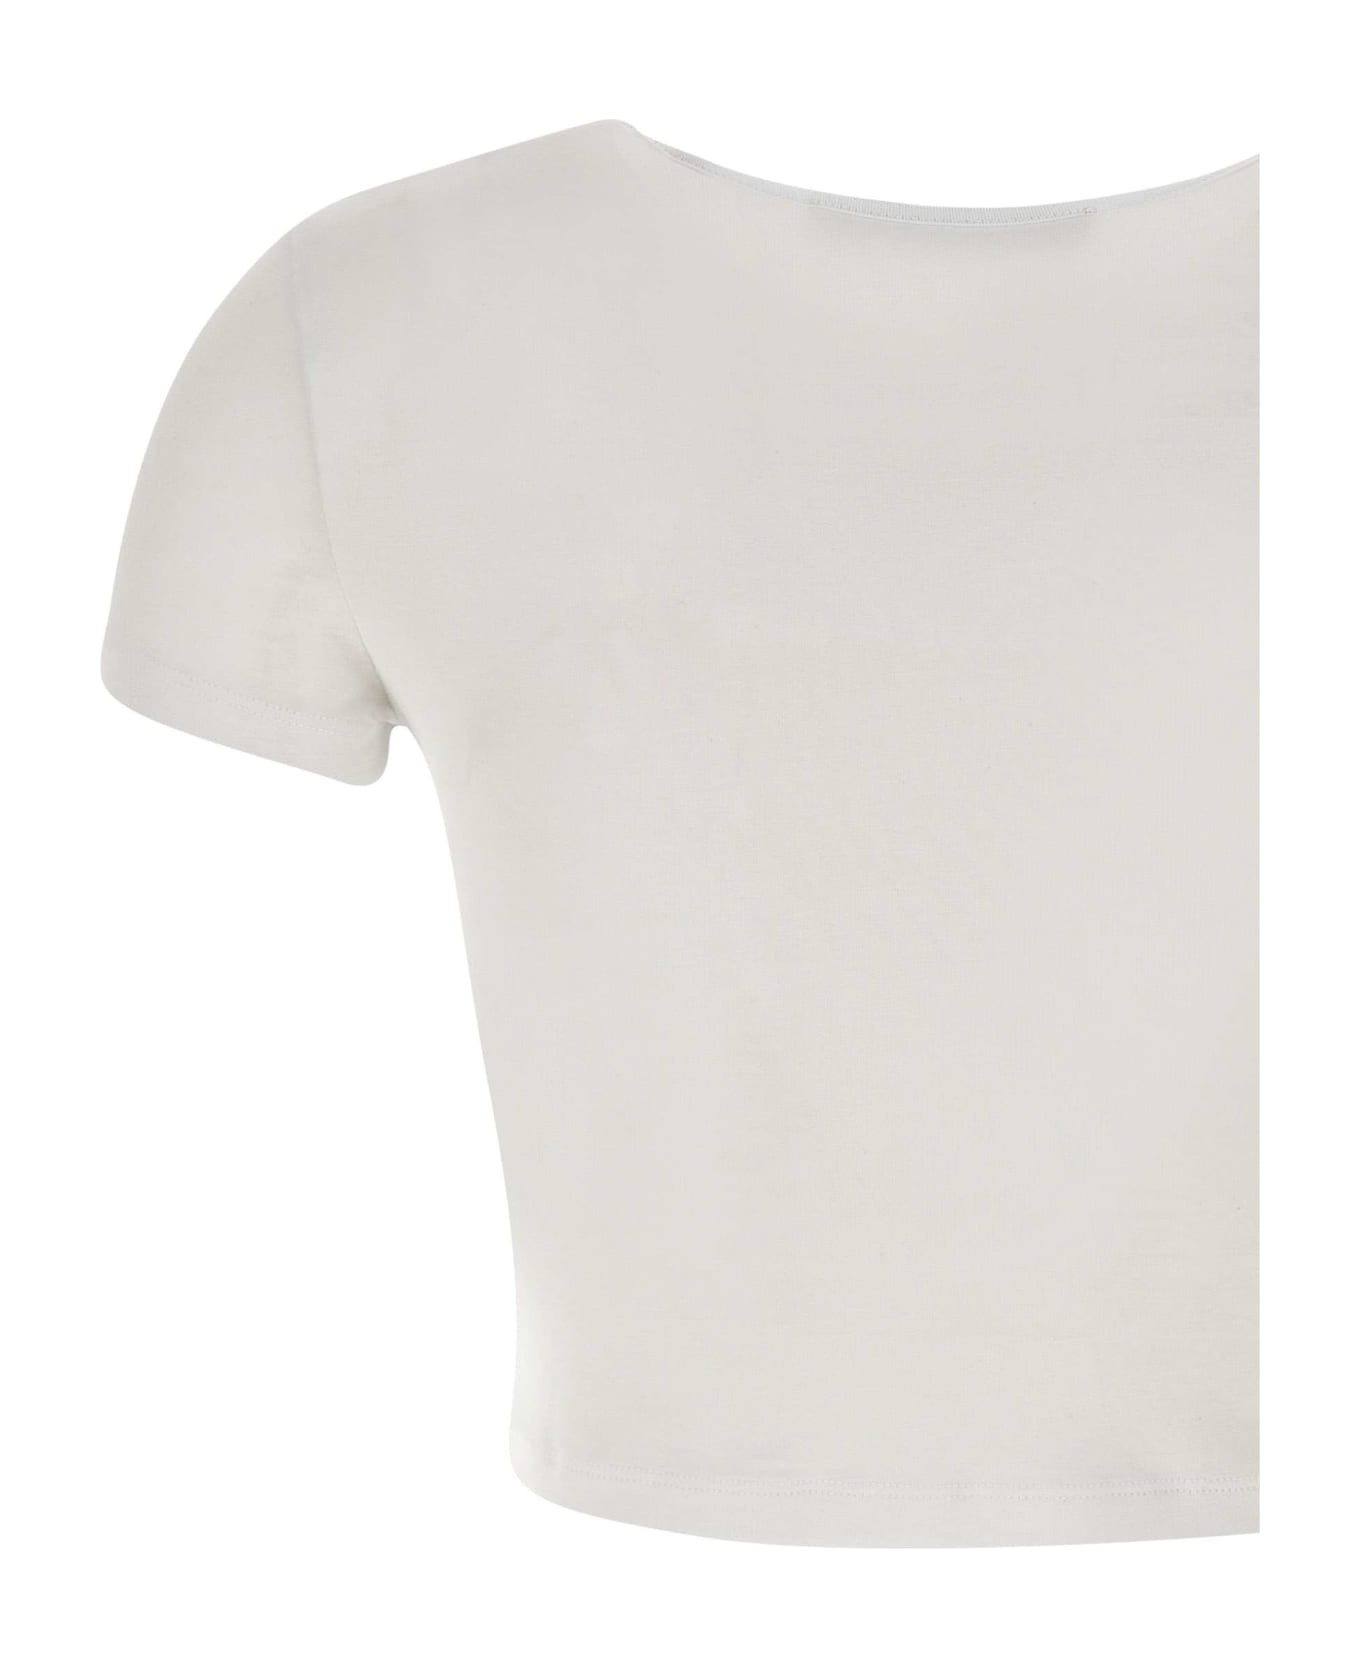 Rotate by Birger Christensen "may" Top - WHITE